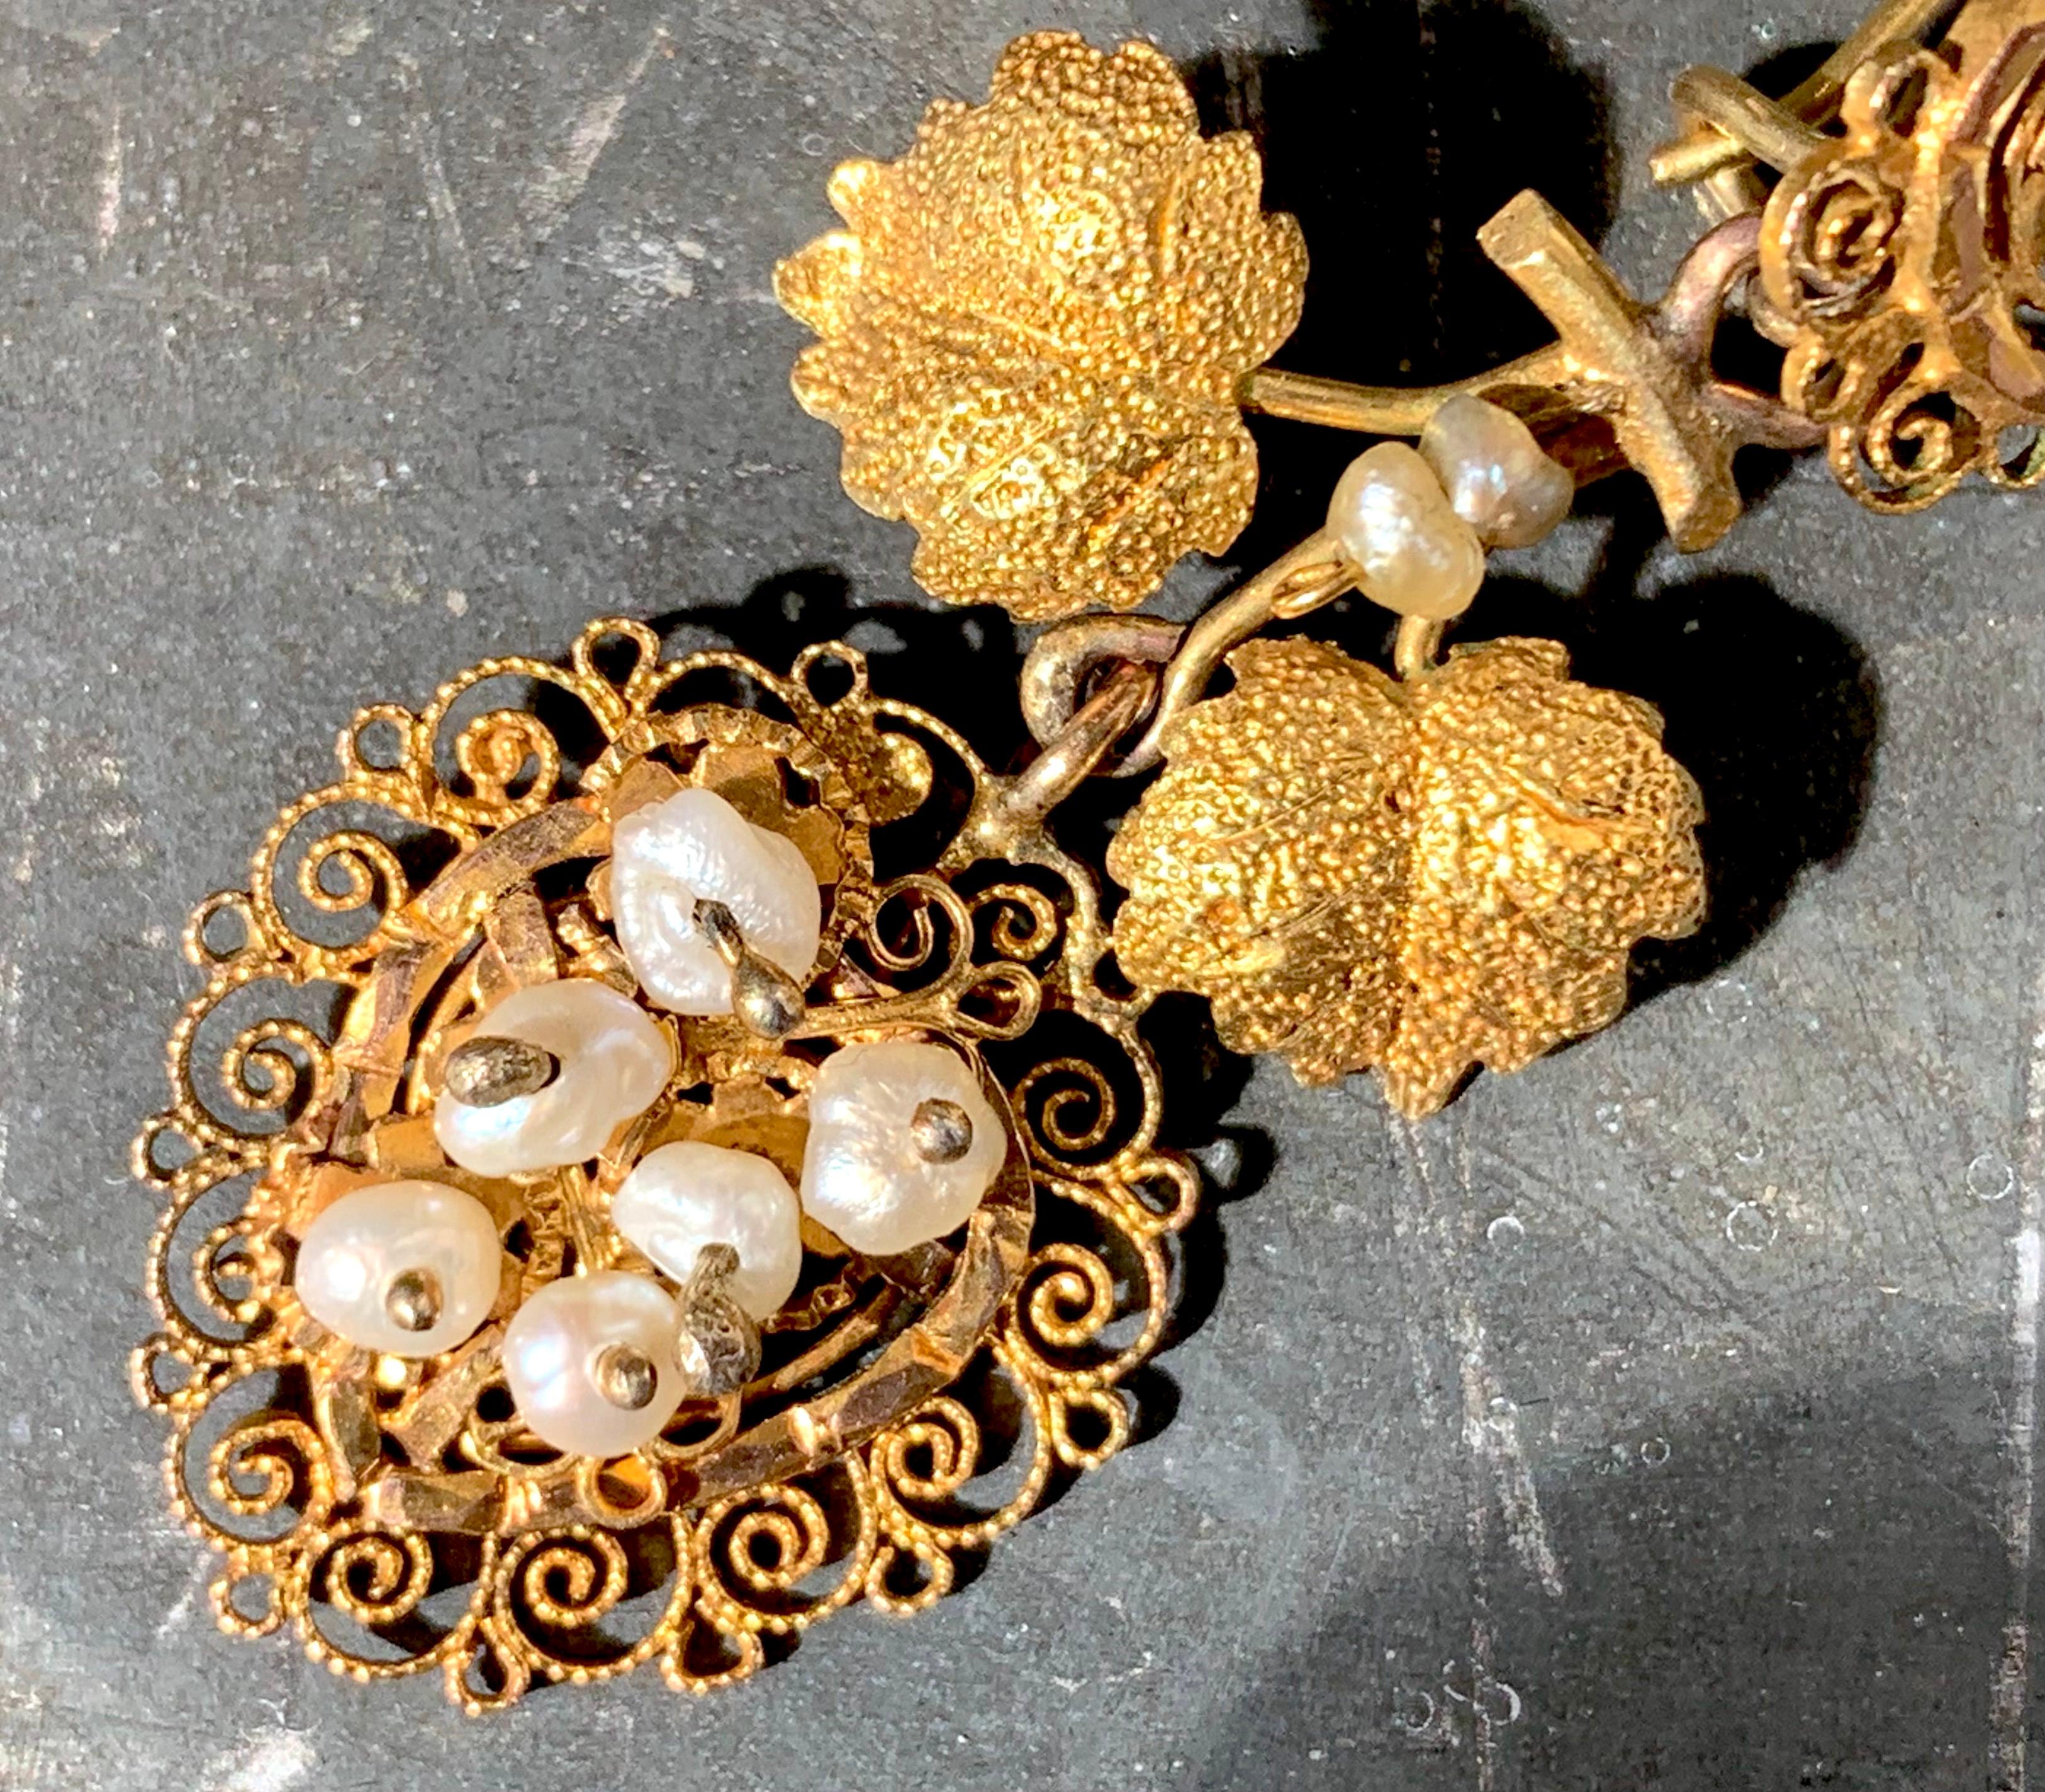 These delightful earrings designed as grapes in heart shape hanging from vine. The vine leaves, cut out of engraved and embossed gold have been handcrafted in Italy in the 1870's.  